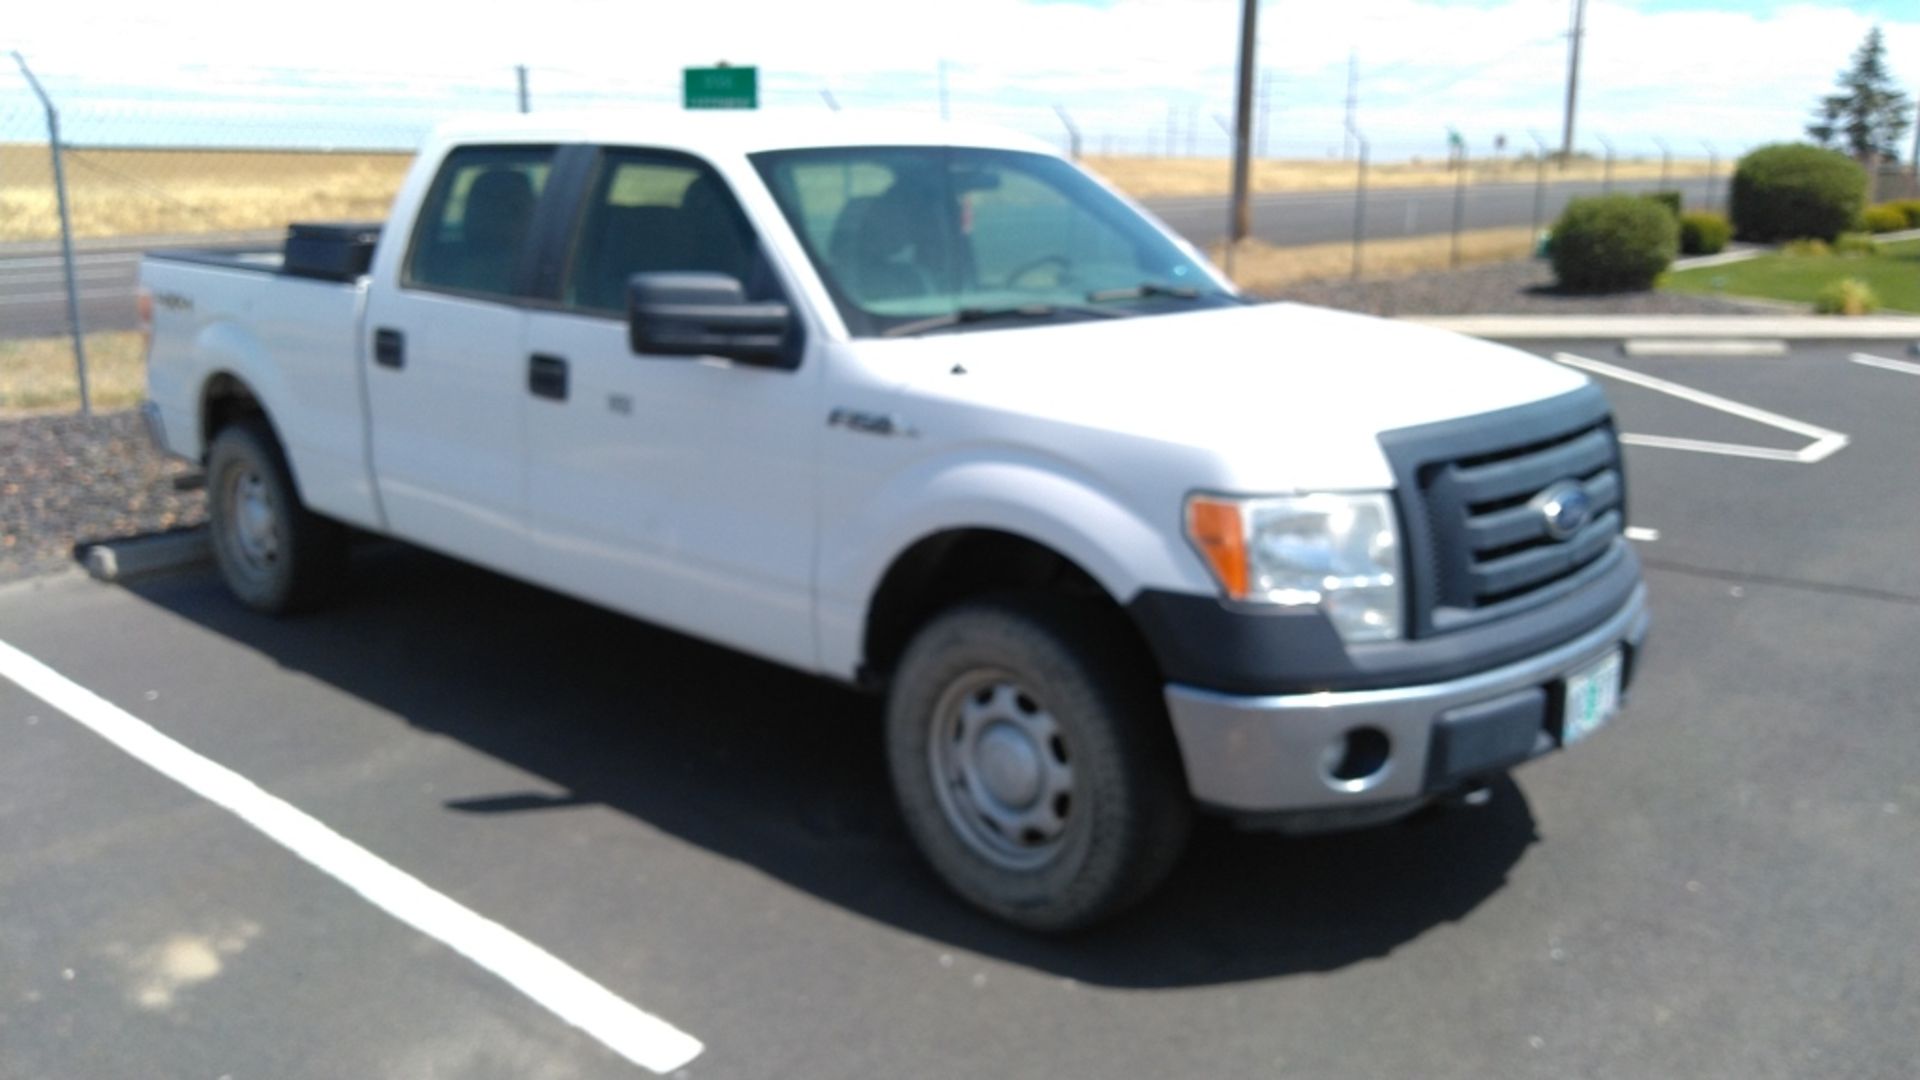 2011 Ford F150 XL 4x4 Crew Cab Pickup - Image 7 of 22